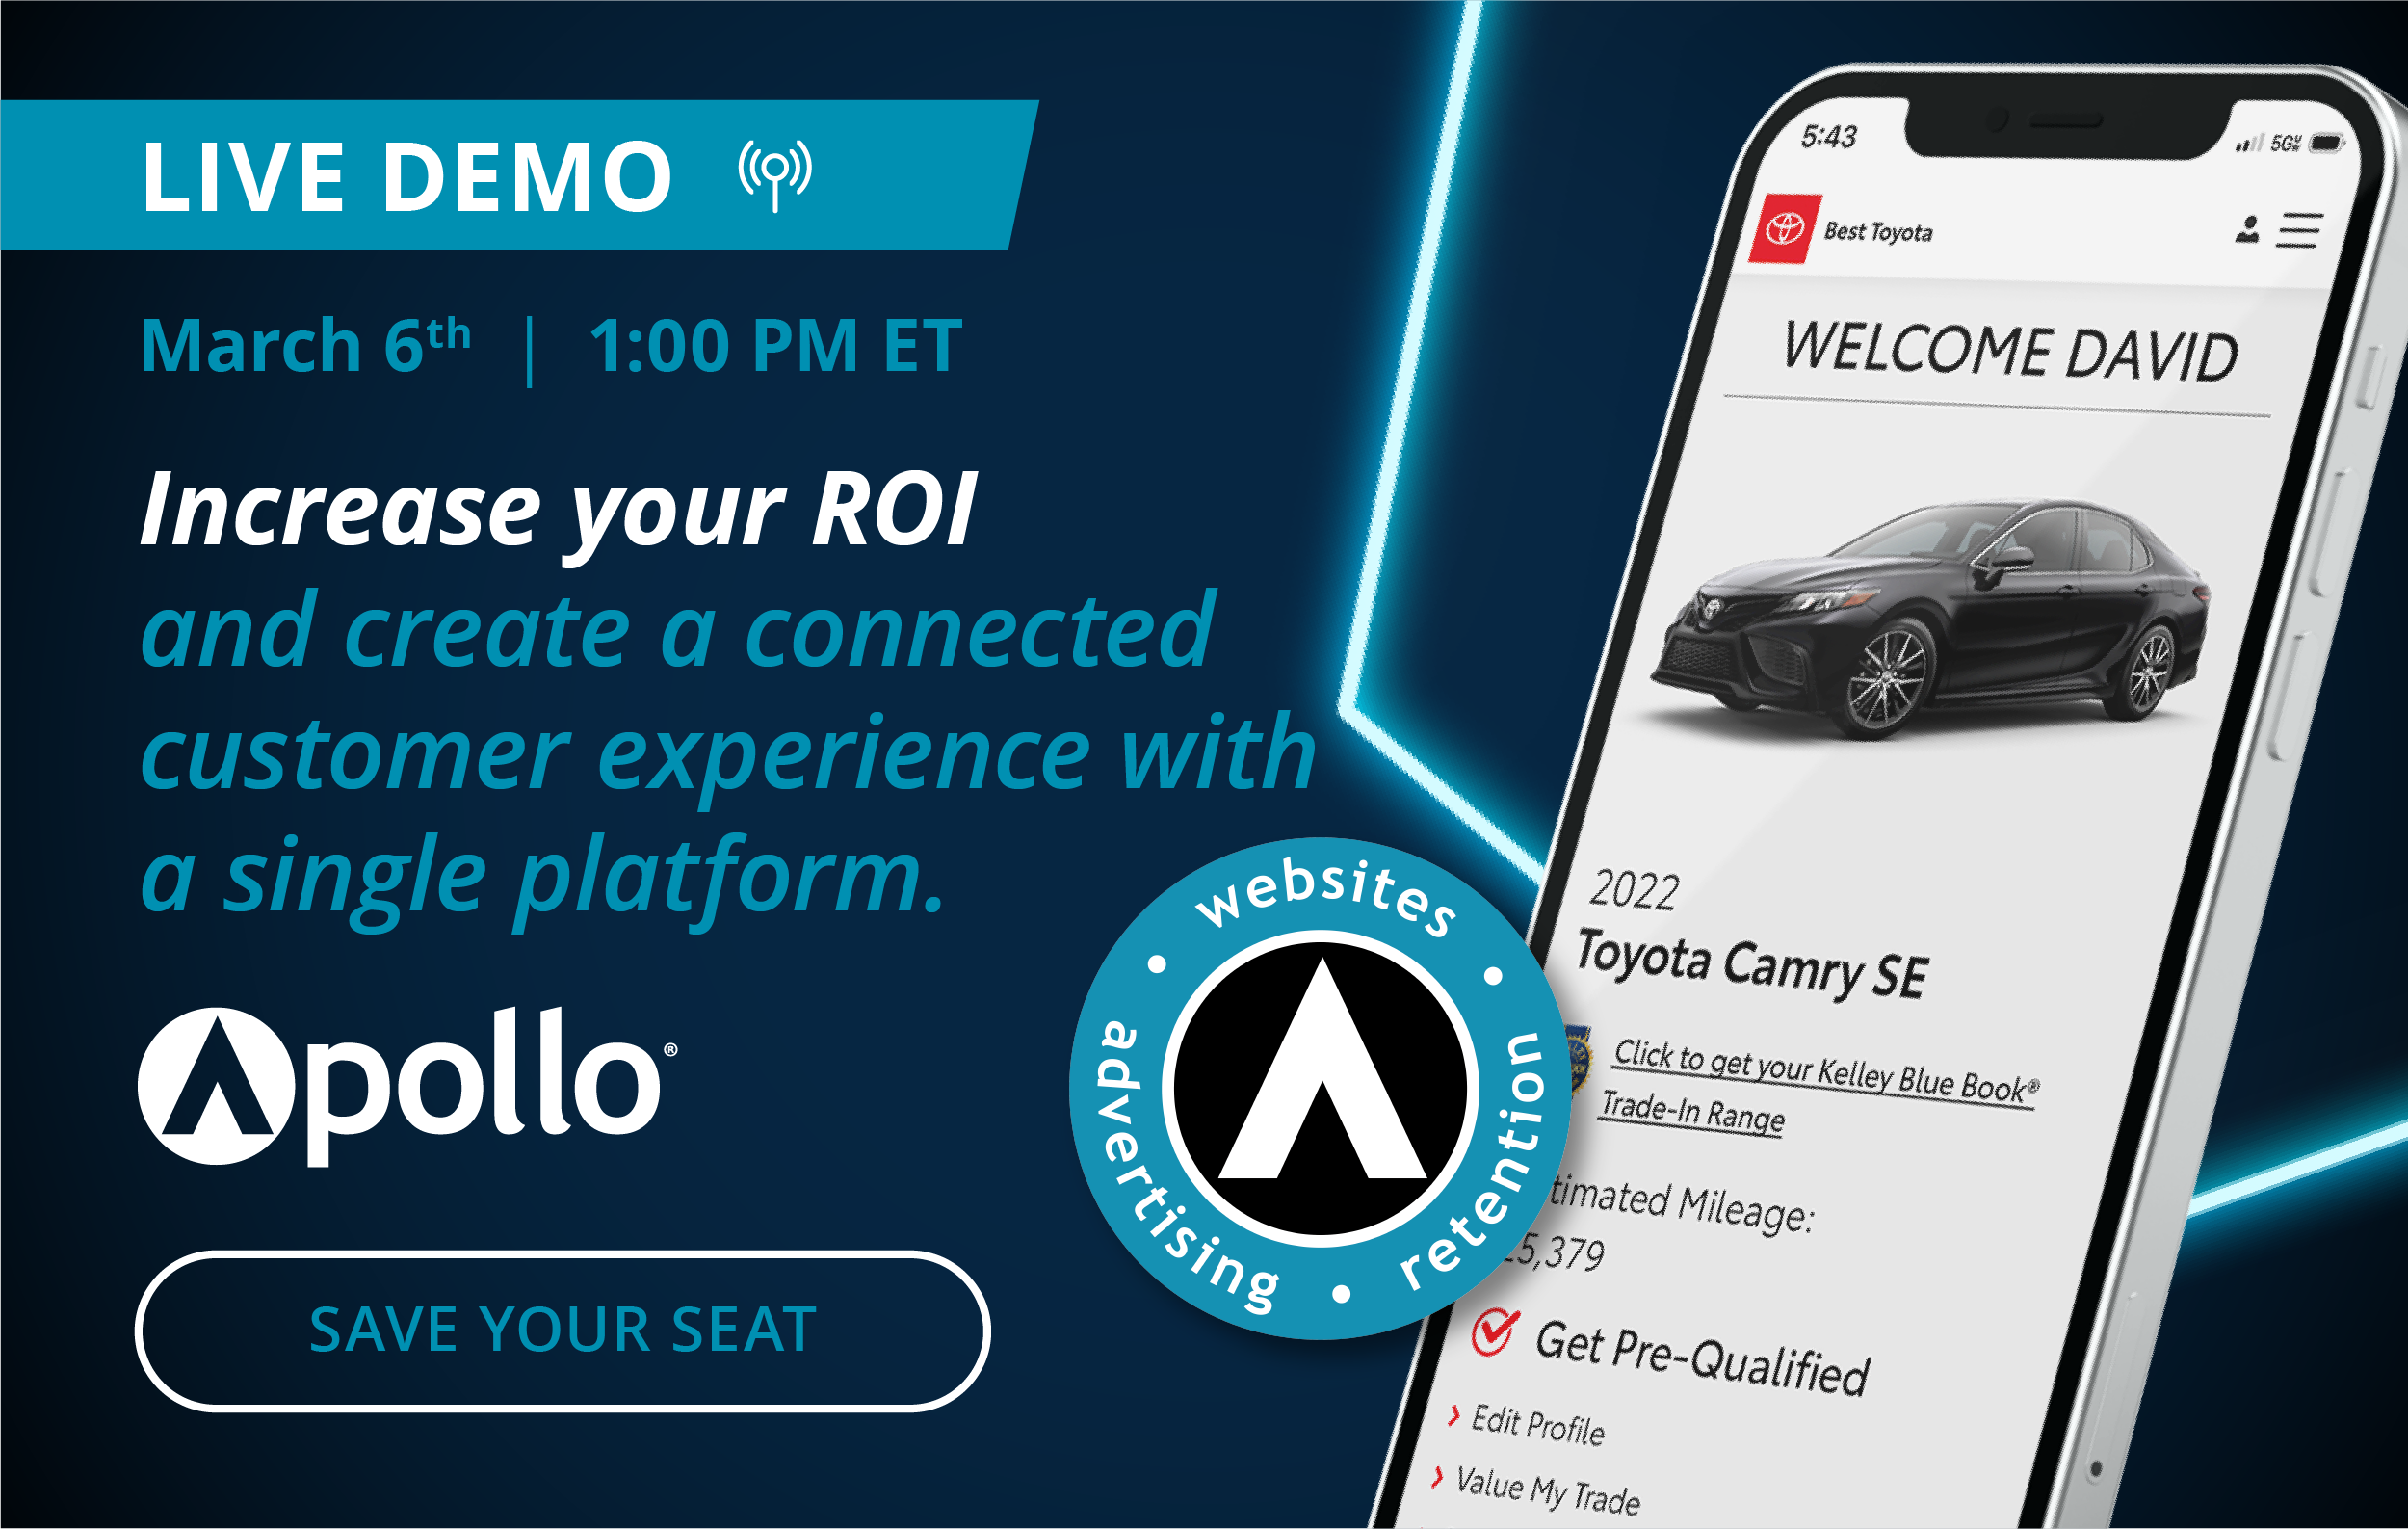 Live Demo: March 6th at 1:00 PM ET